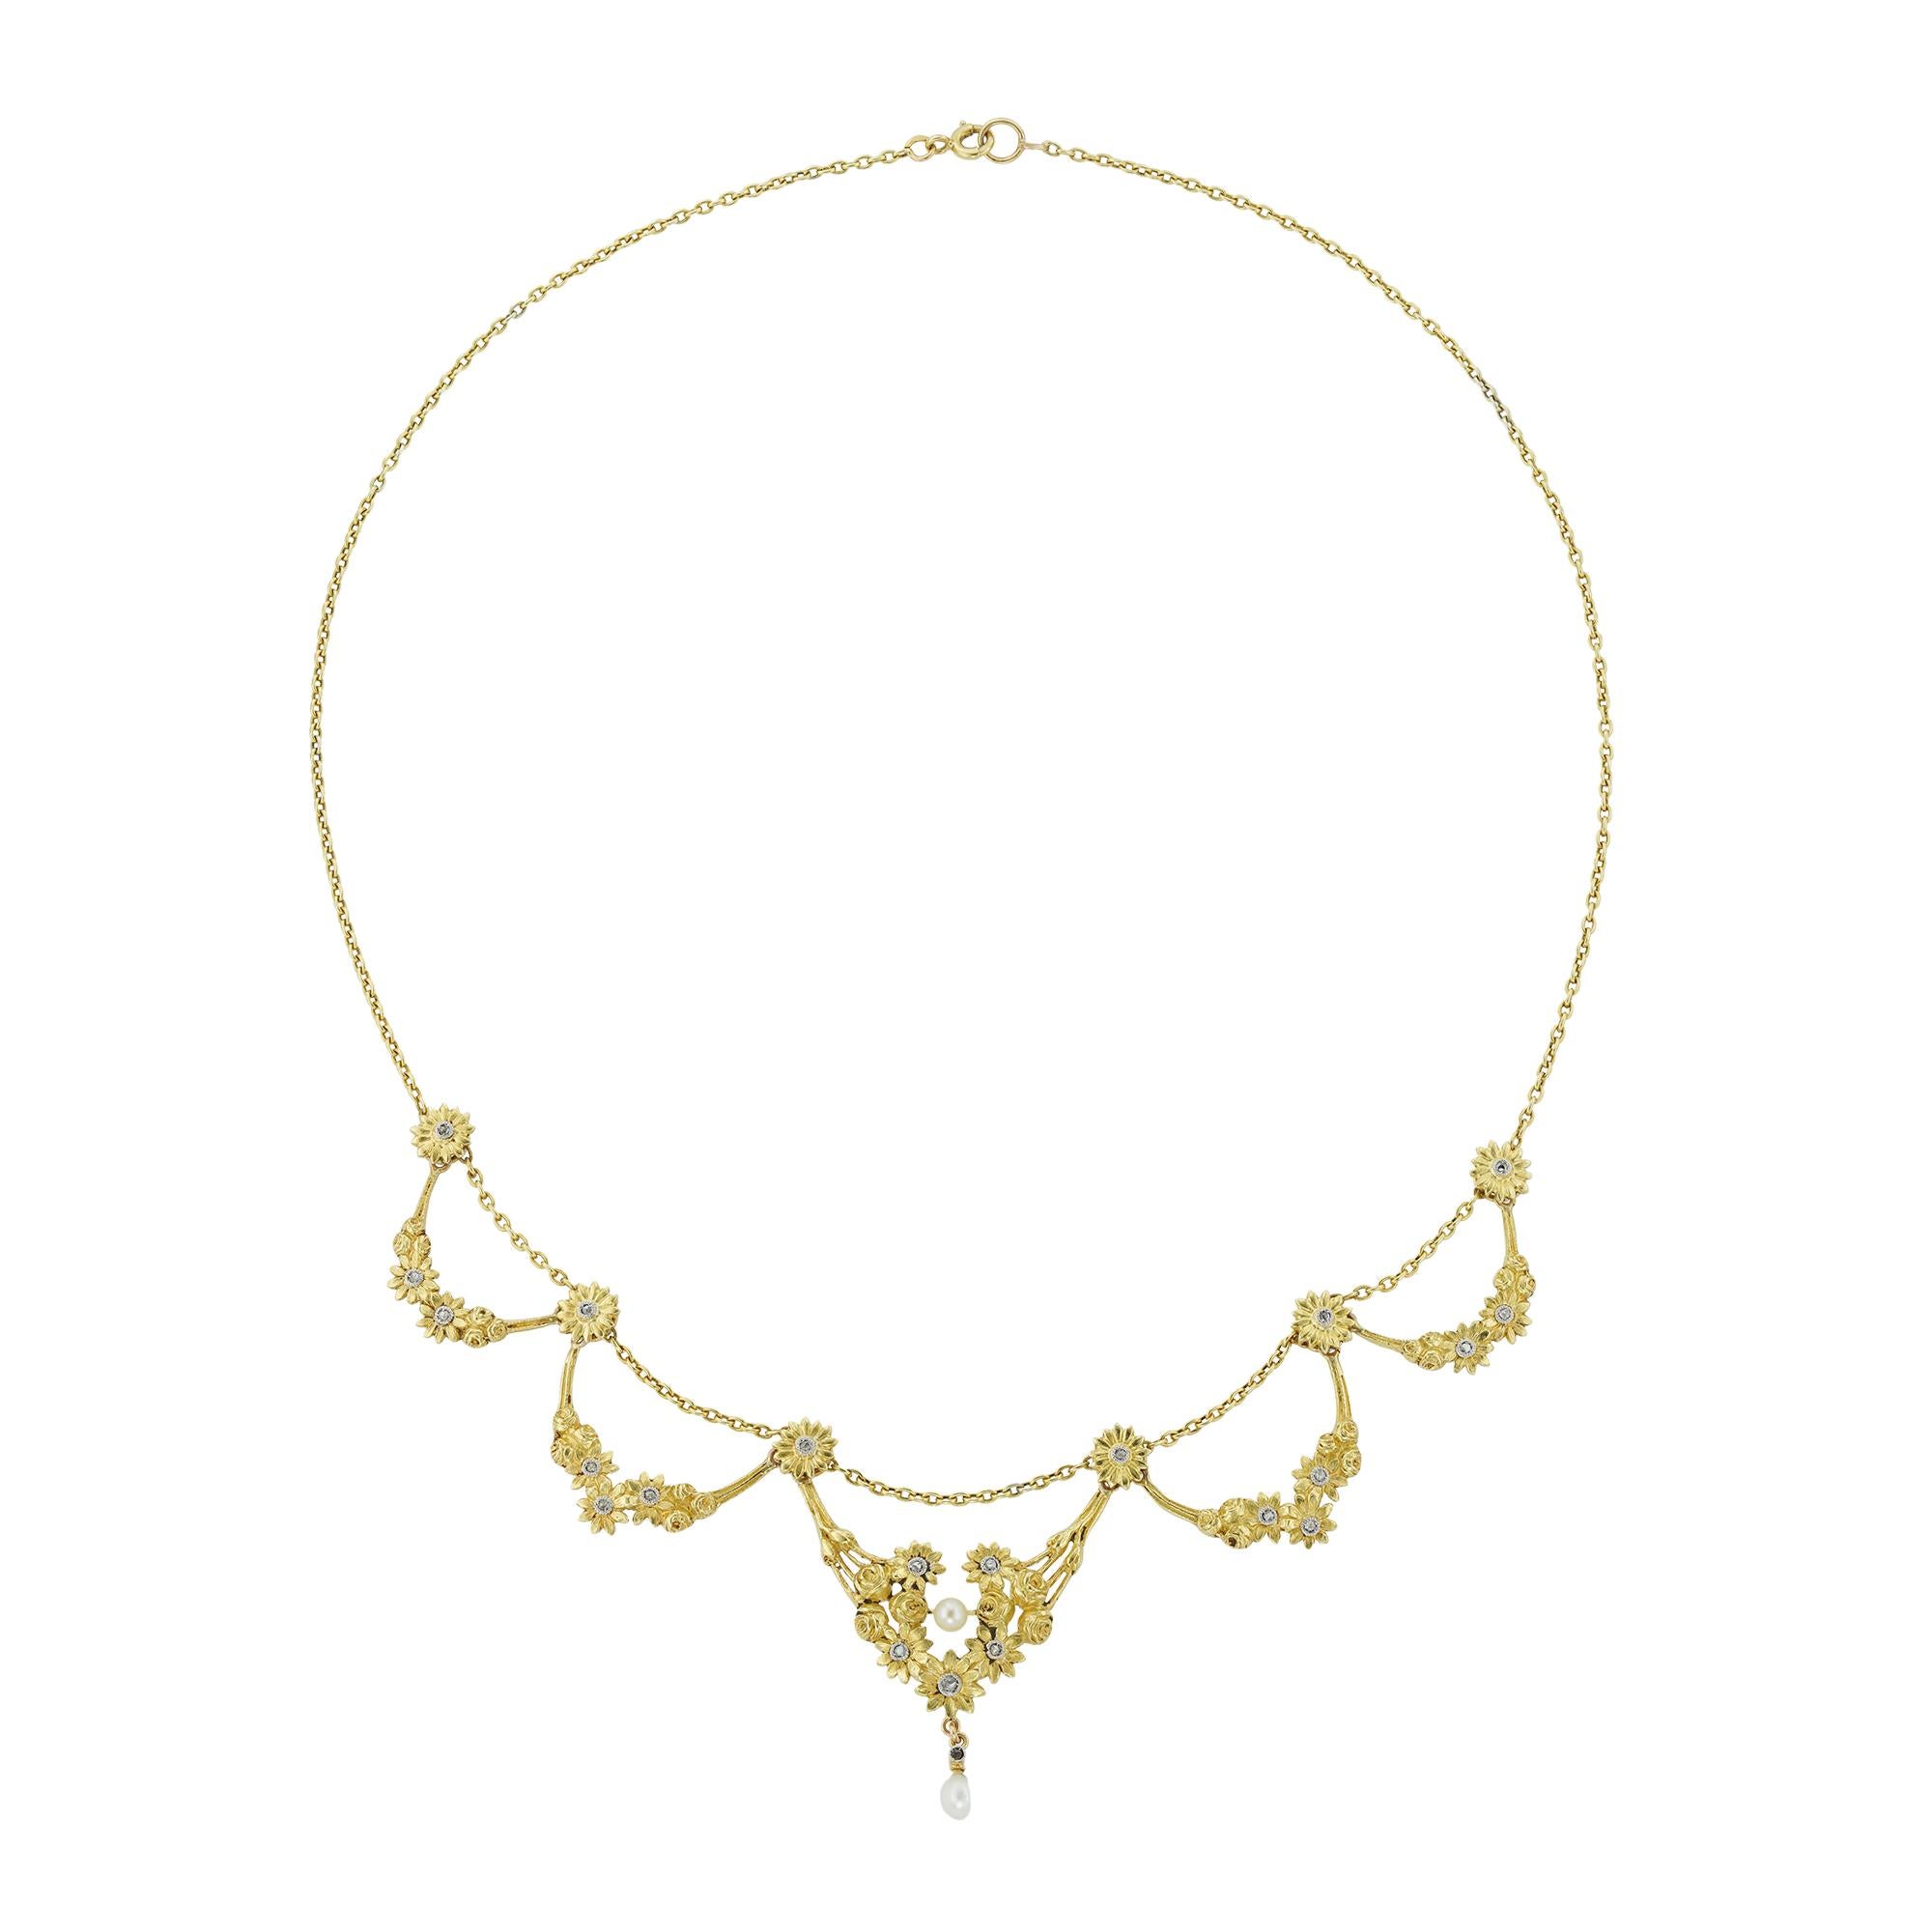 A Belle Époque diamond-set floral swag necklace, consisting of graduating flower garlands of roses and daisies, with the centre swag suspending a pearl drop, all attached to a trace chain, bearing French marks for 18ct gold, circa 1890, measuring